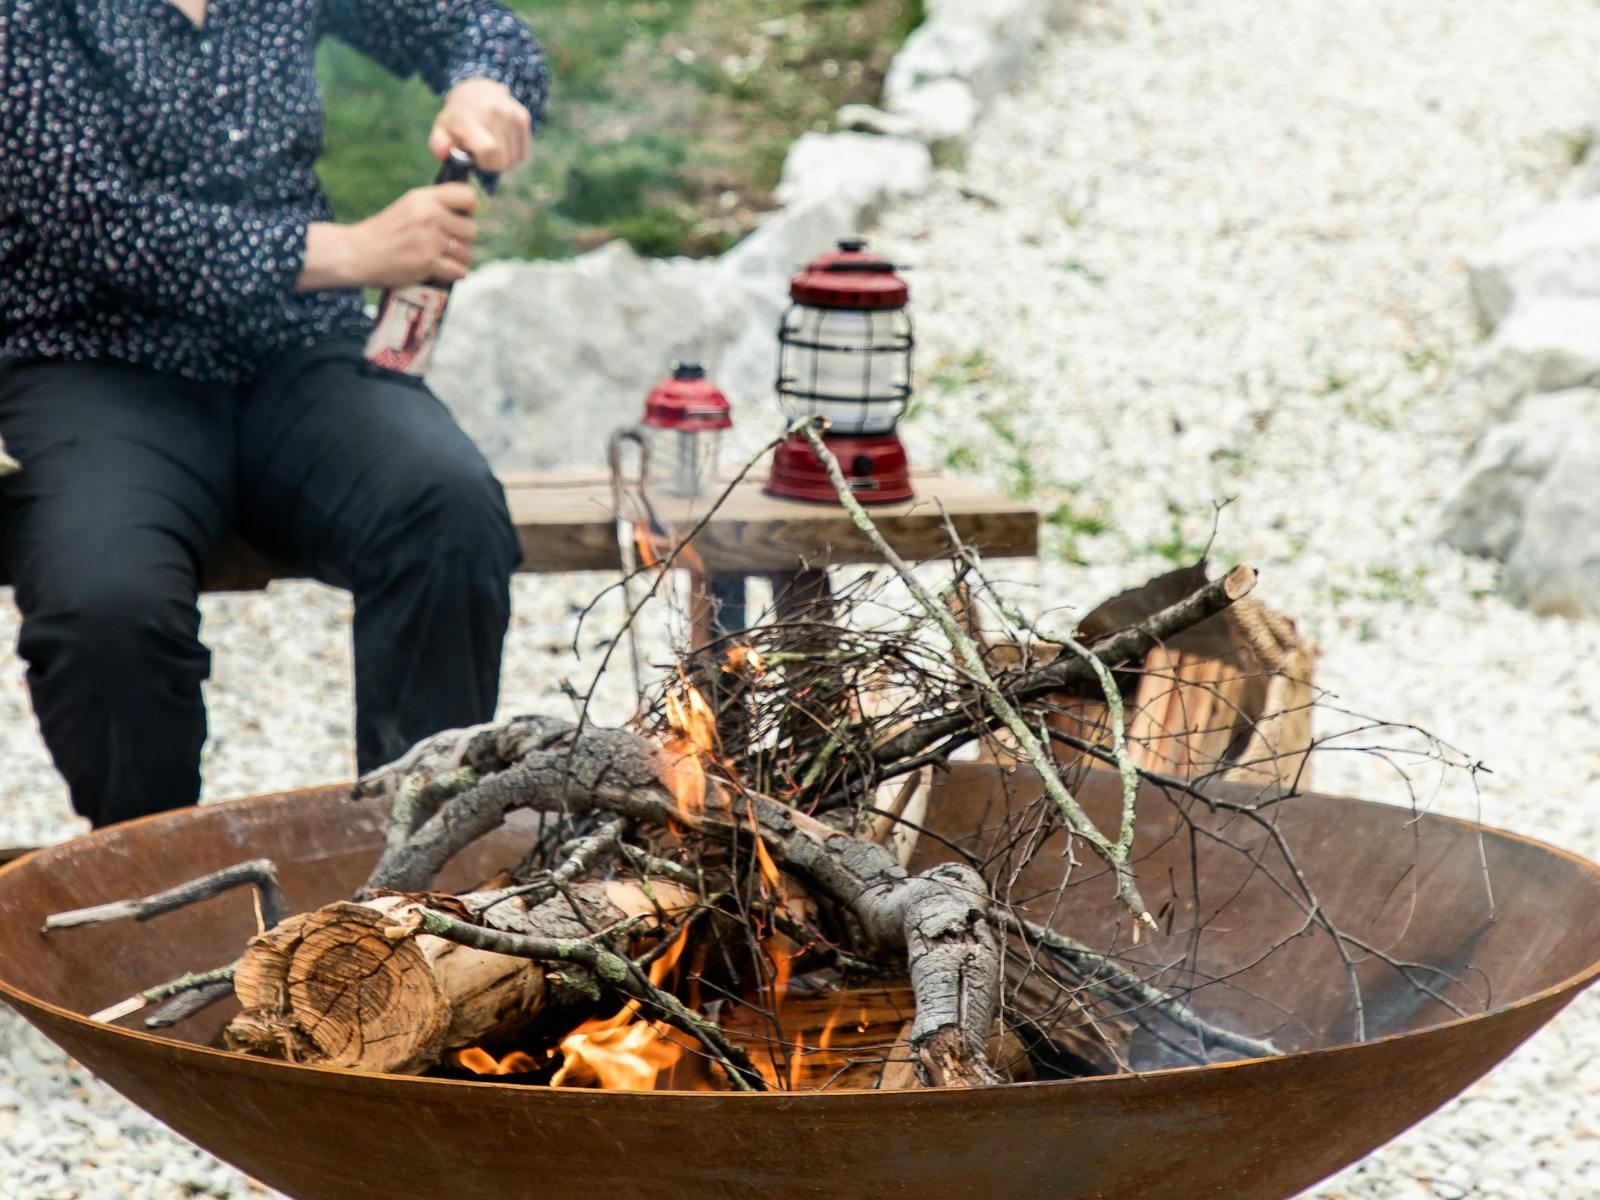 Large steel fire pit with a woman opening a cider behind it